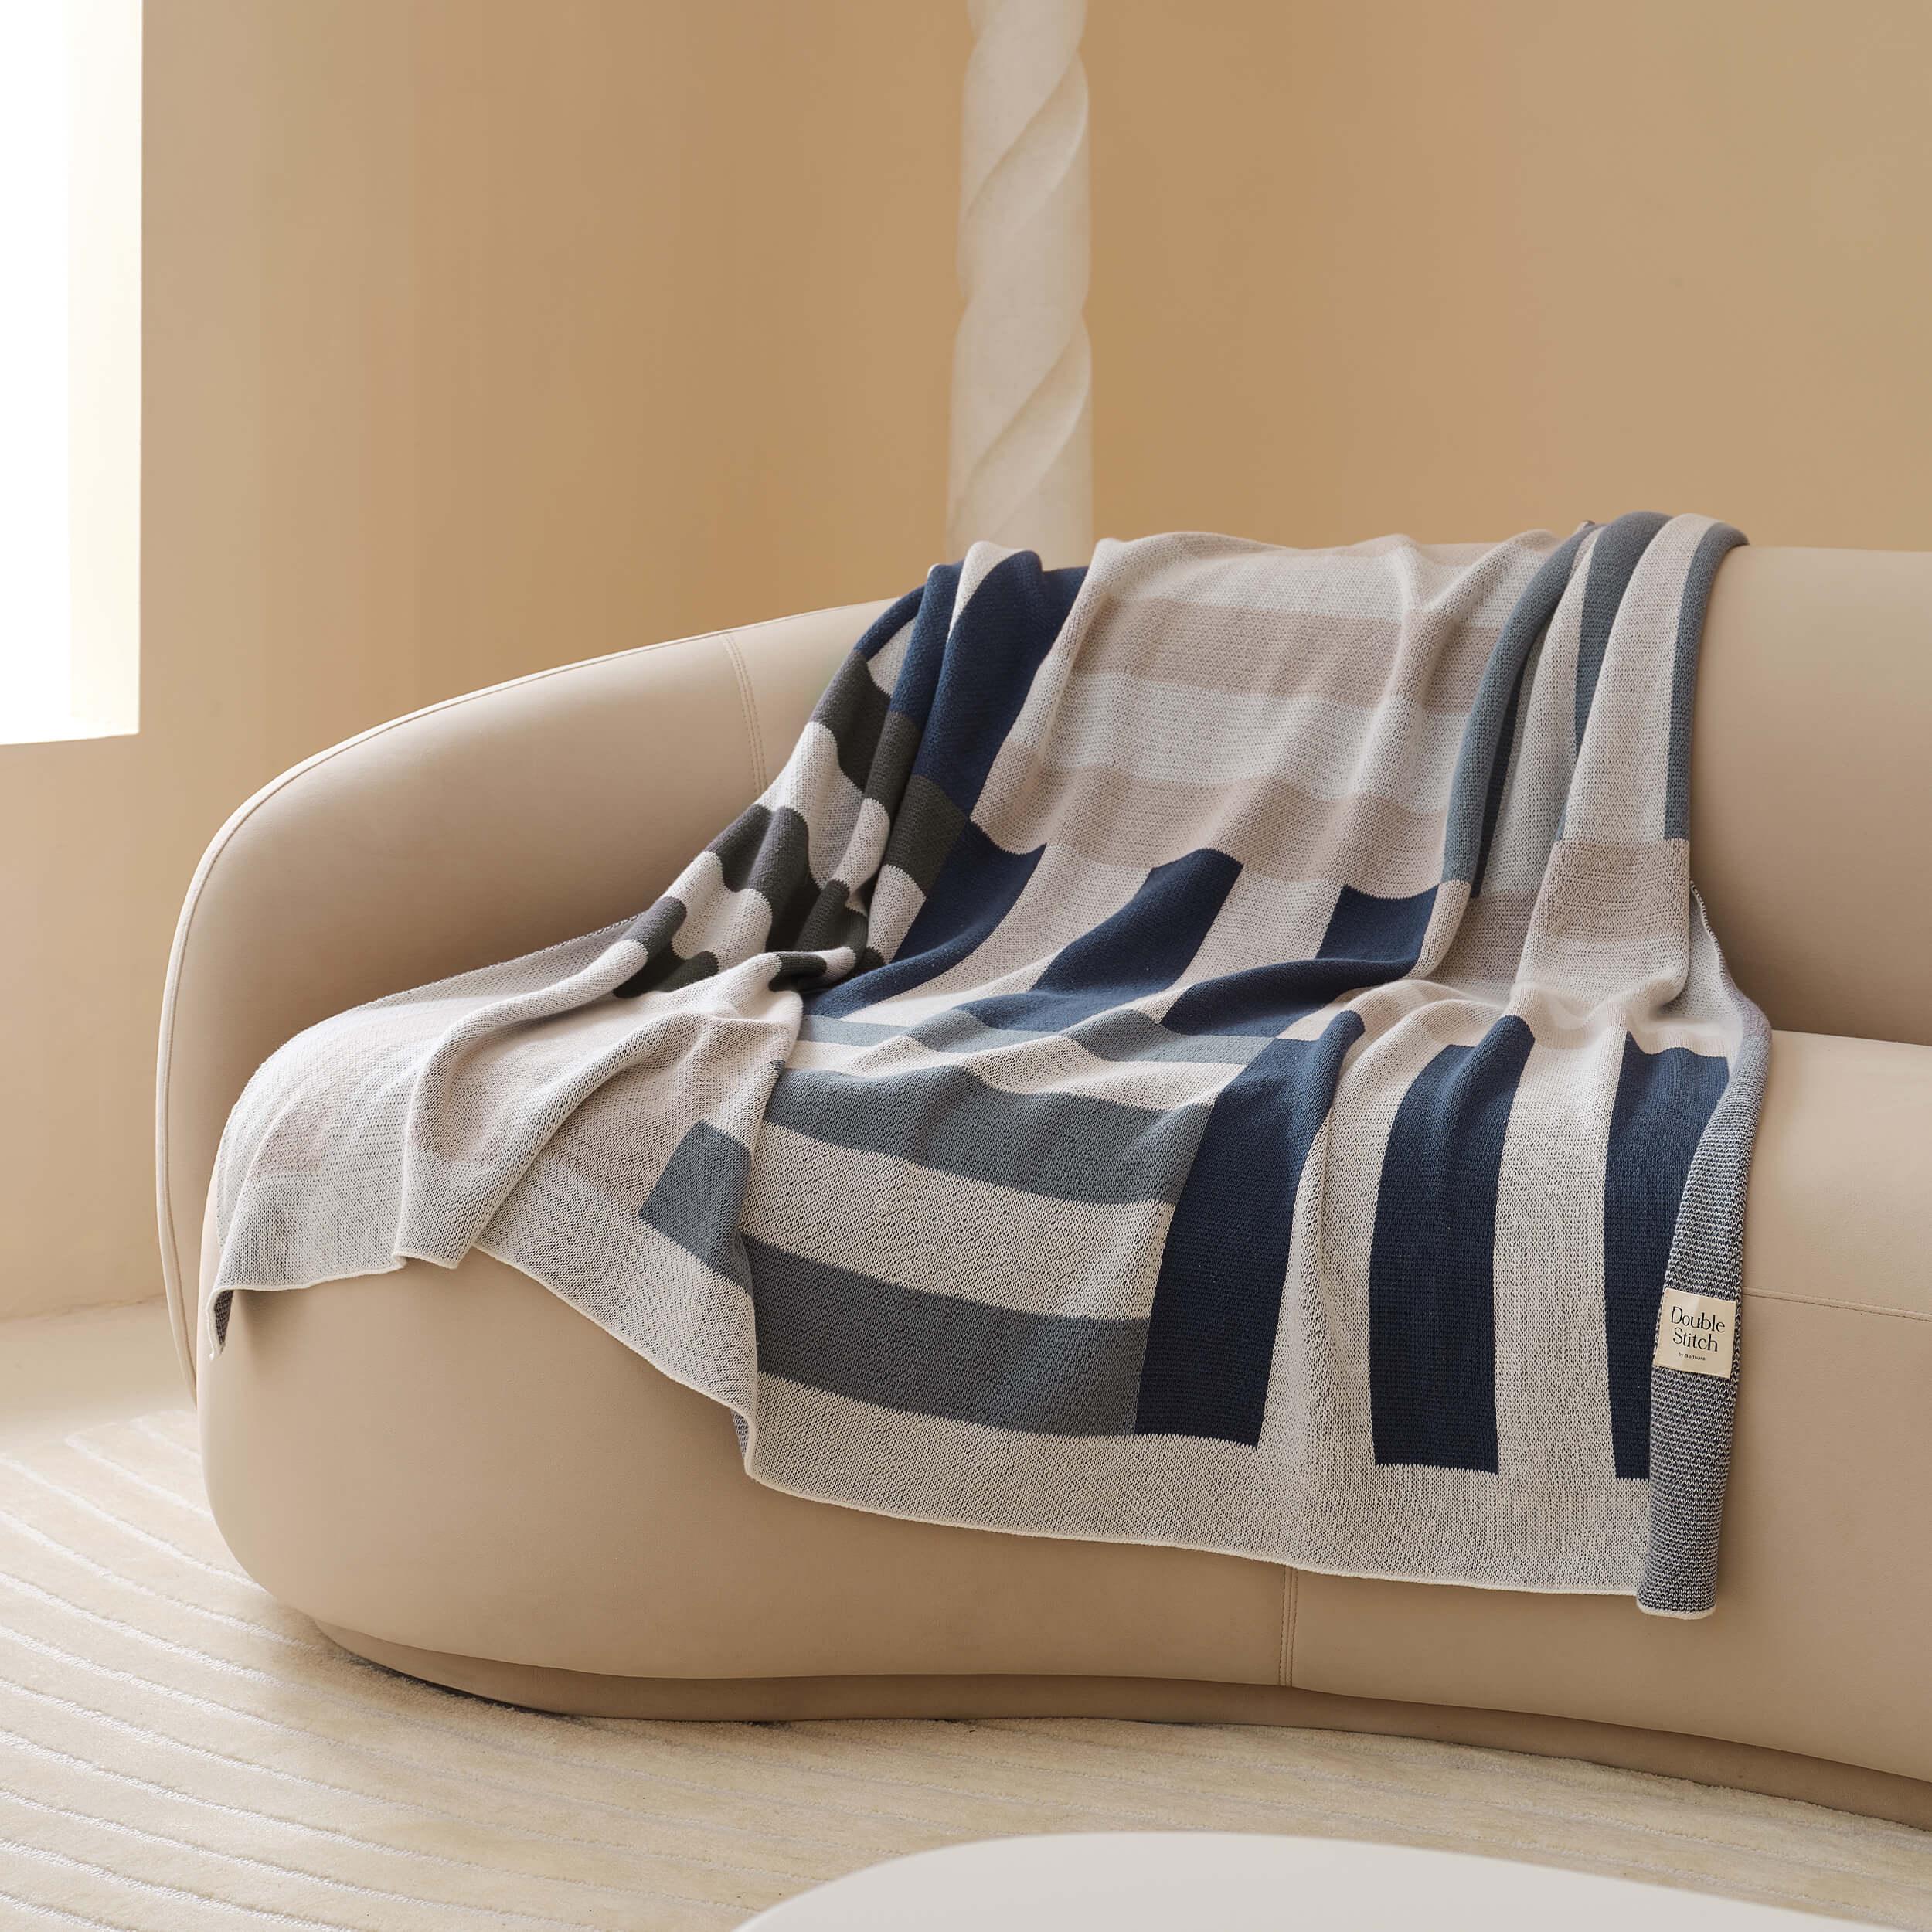 Elevate your home decor with the modern Intarsia knit throw blanket, a perfect blend of style and comfort.